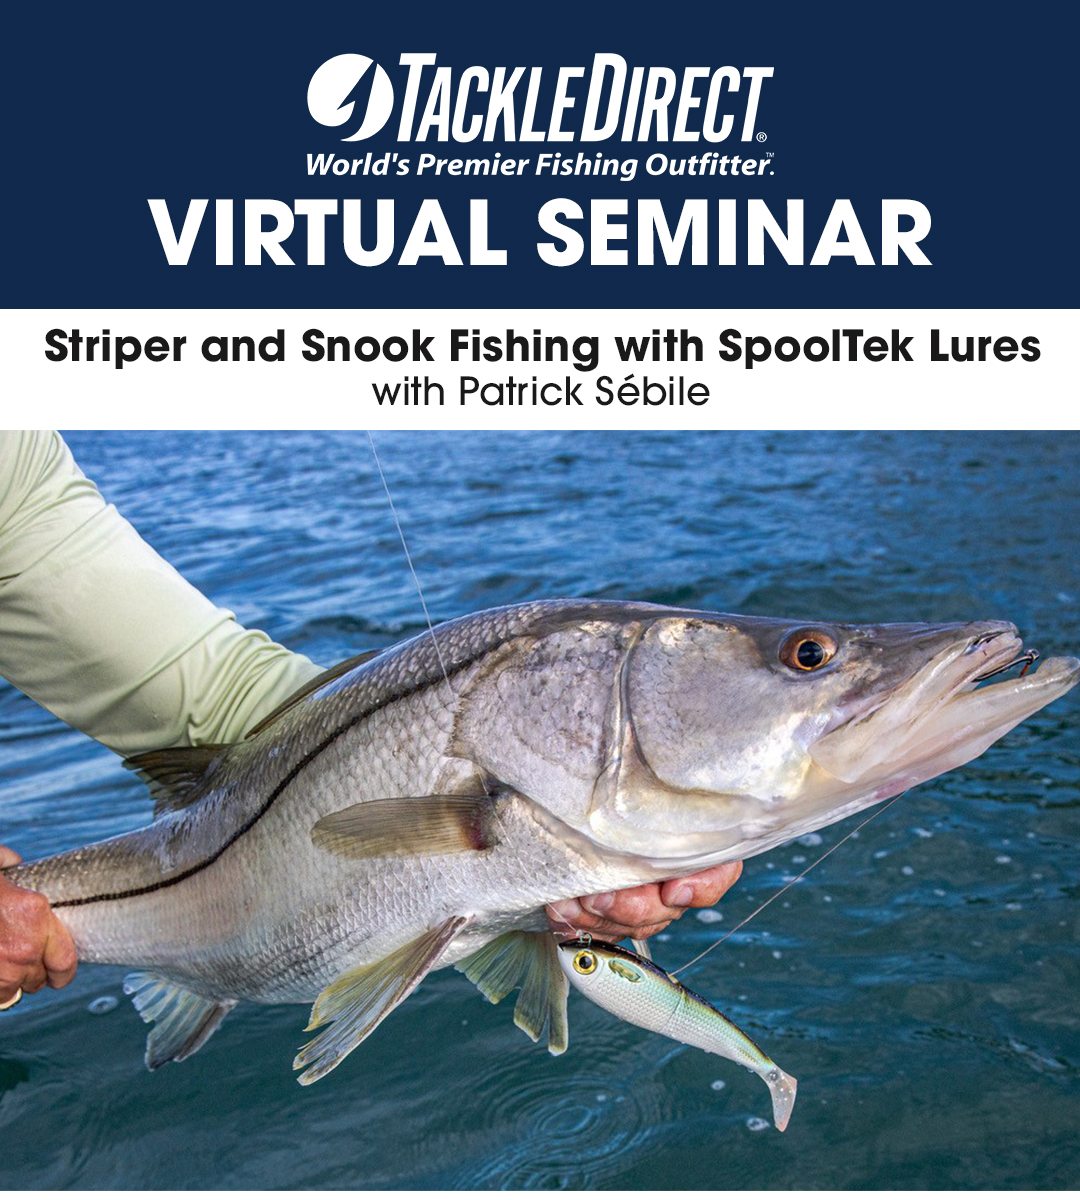 Striper and Snook Fishing with Spooltek Lures